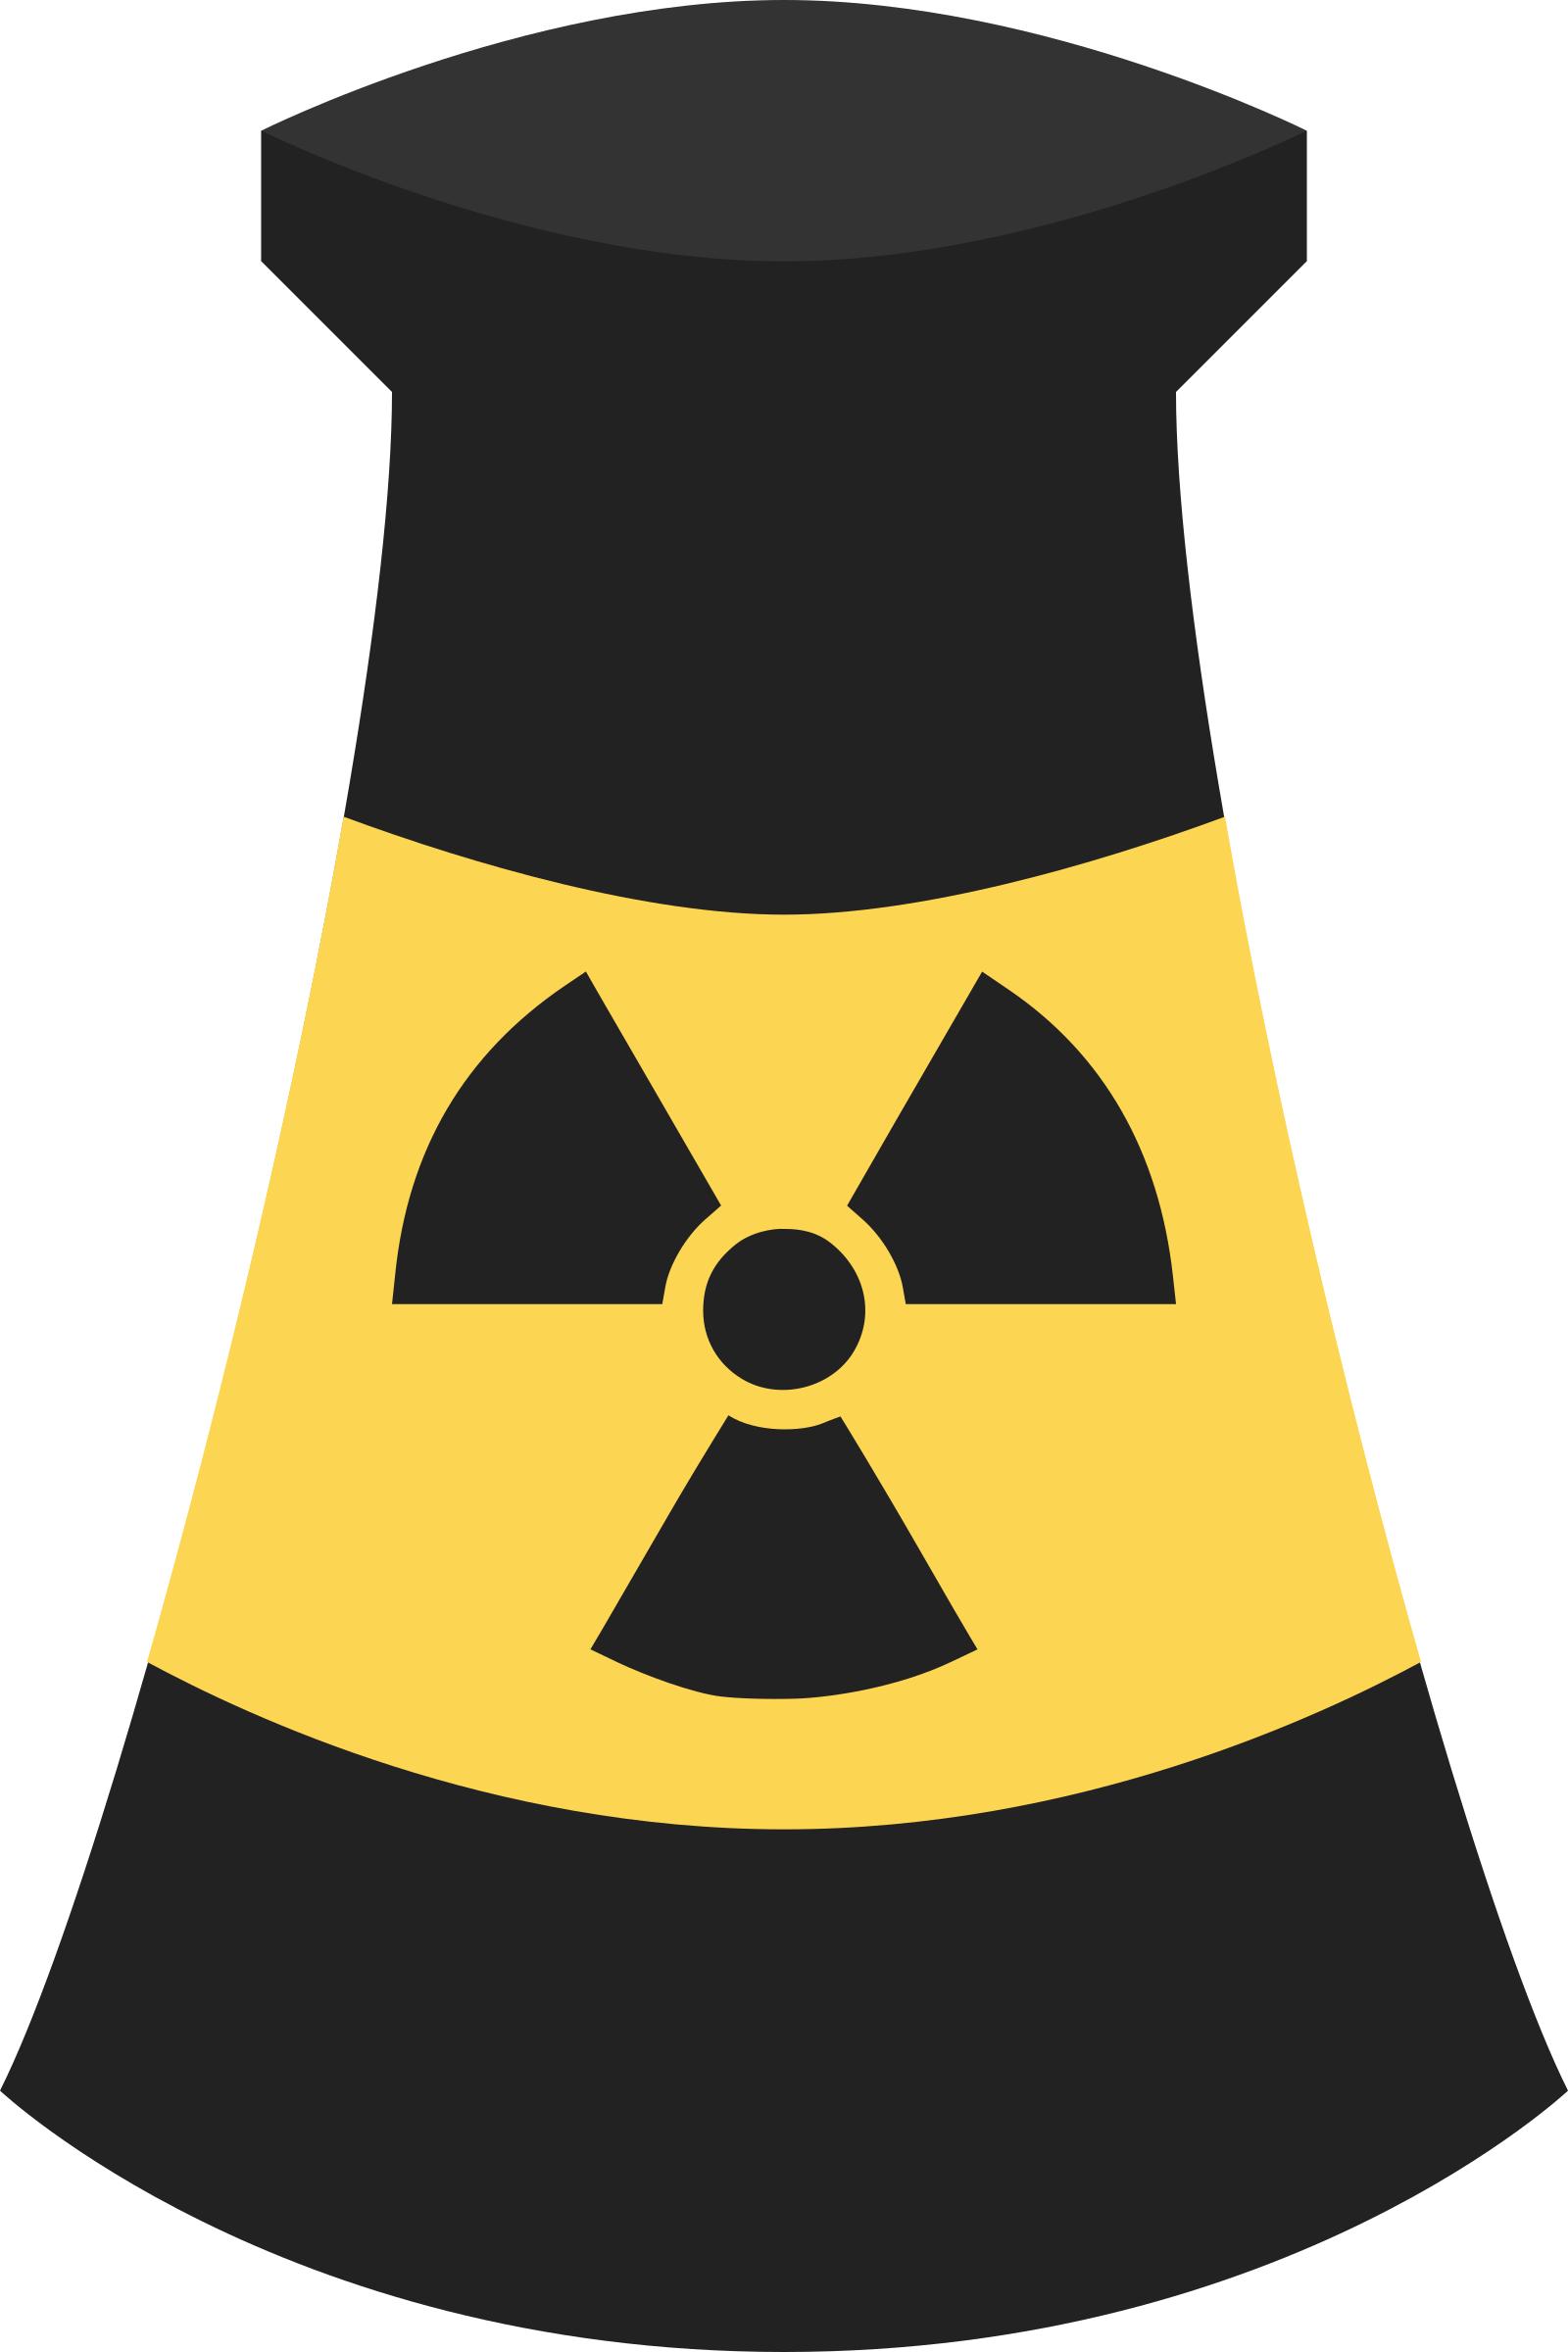 Atomic Energy Plant Symbol 4 PNG icons